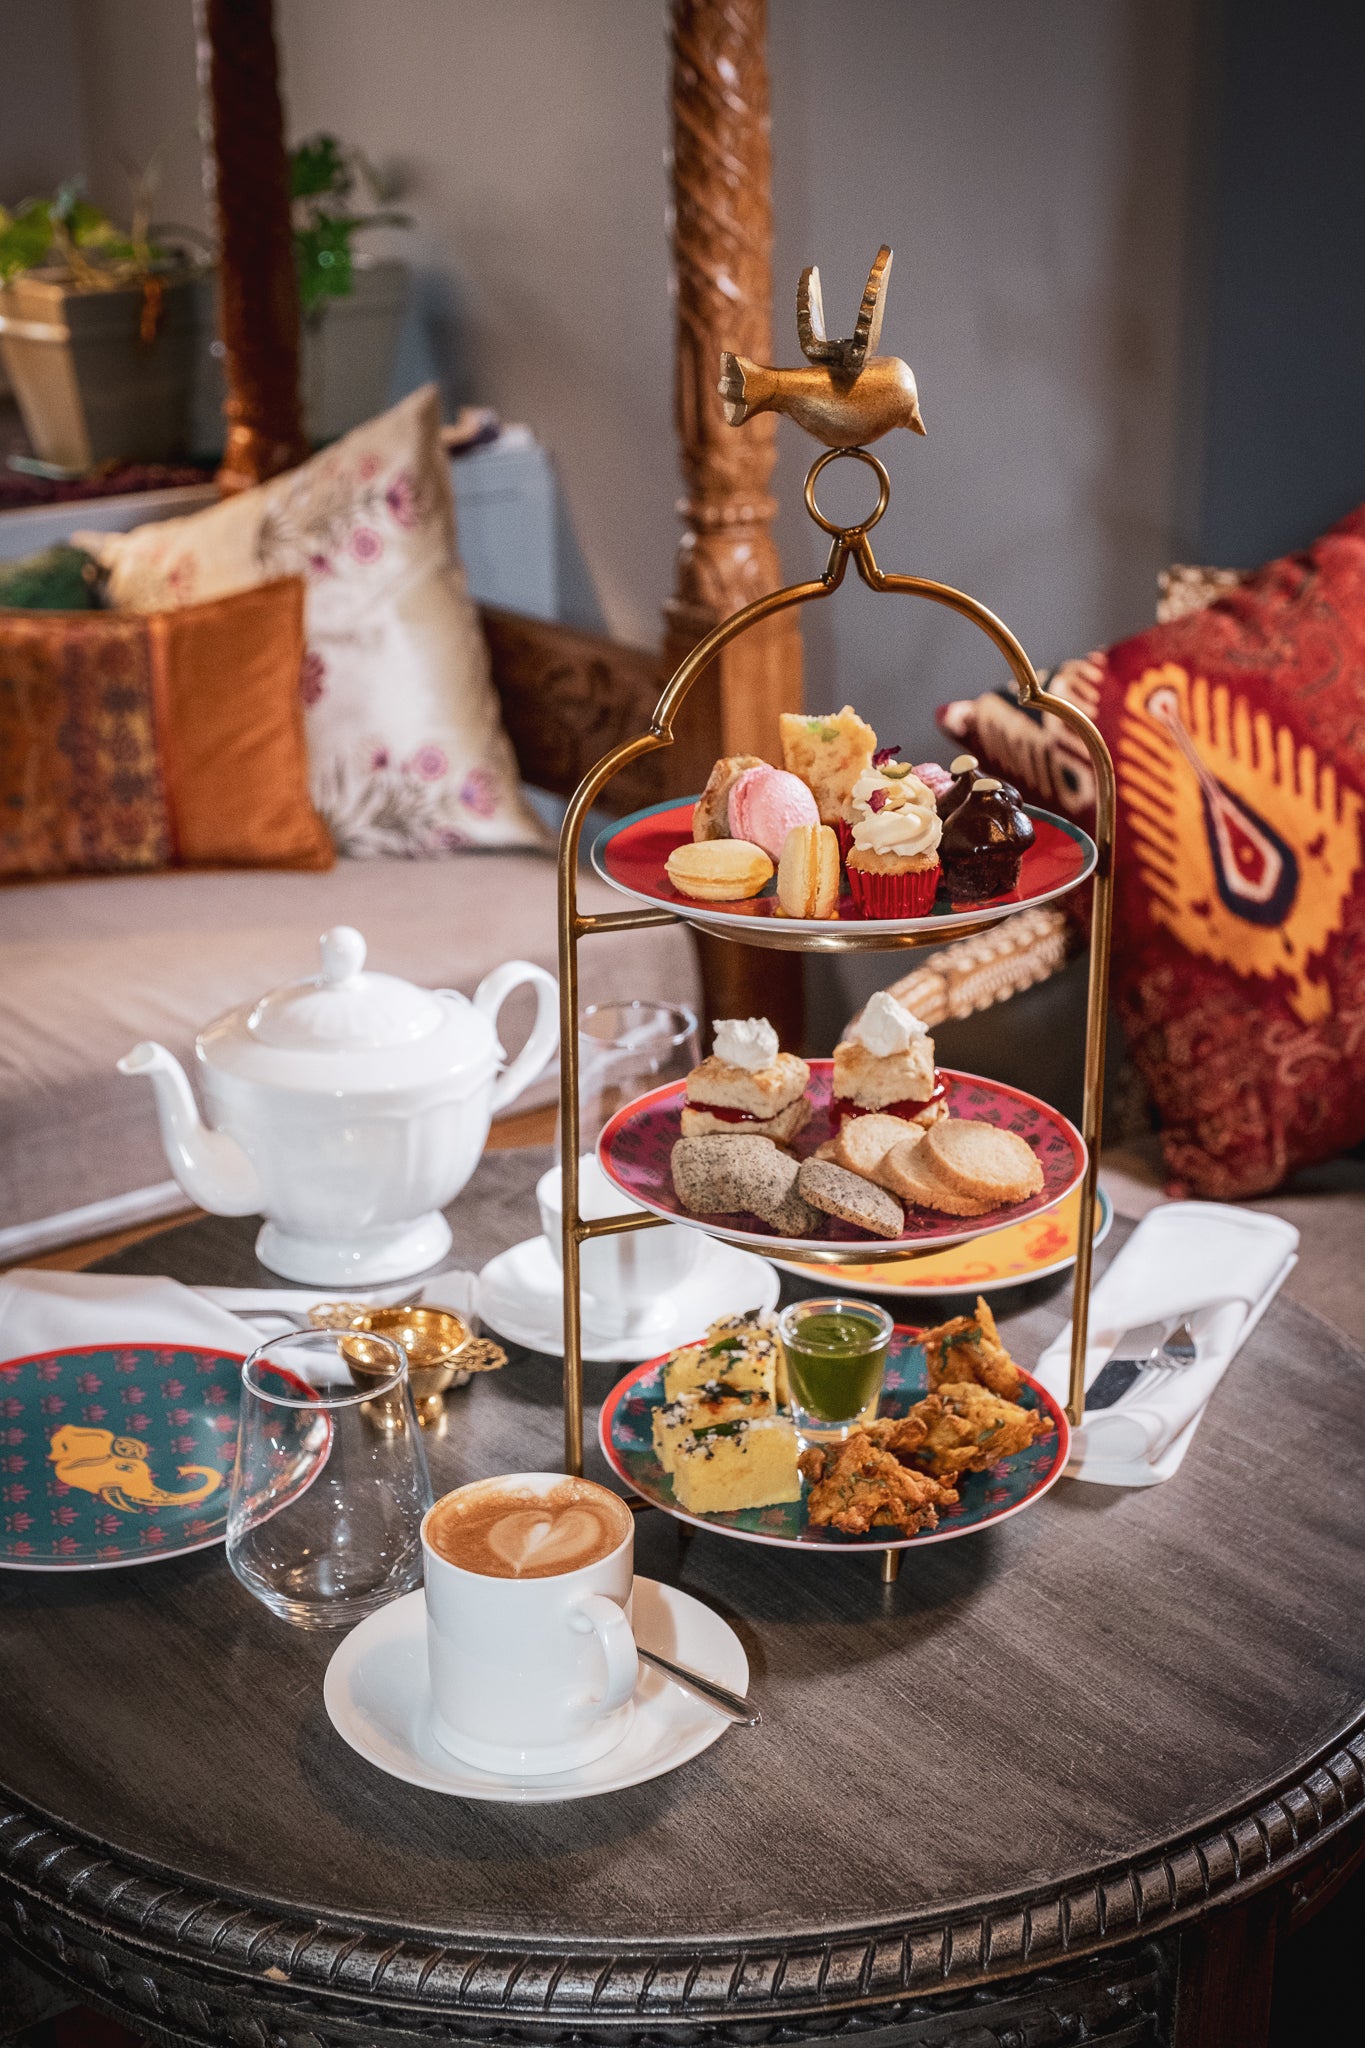 Lavish Indian Afternoon Tea for Two